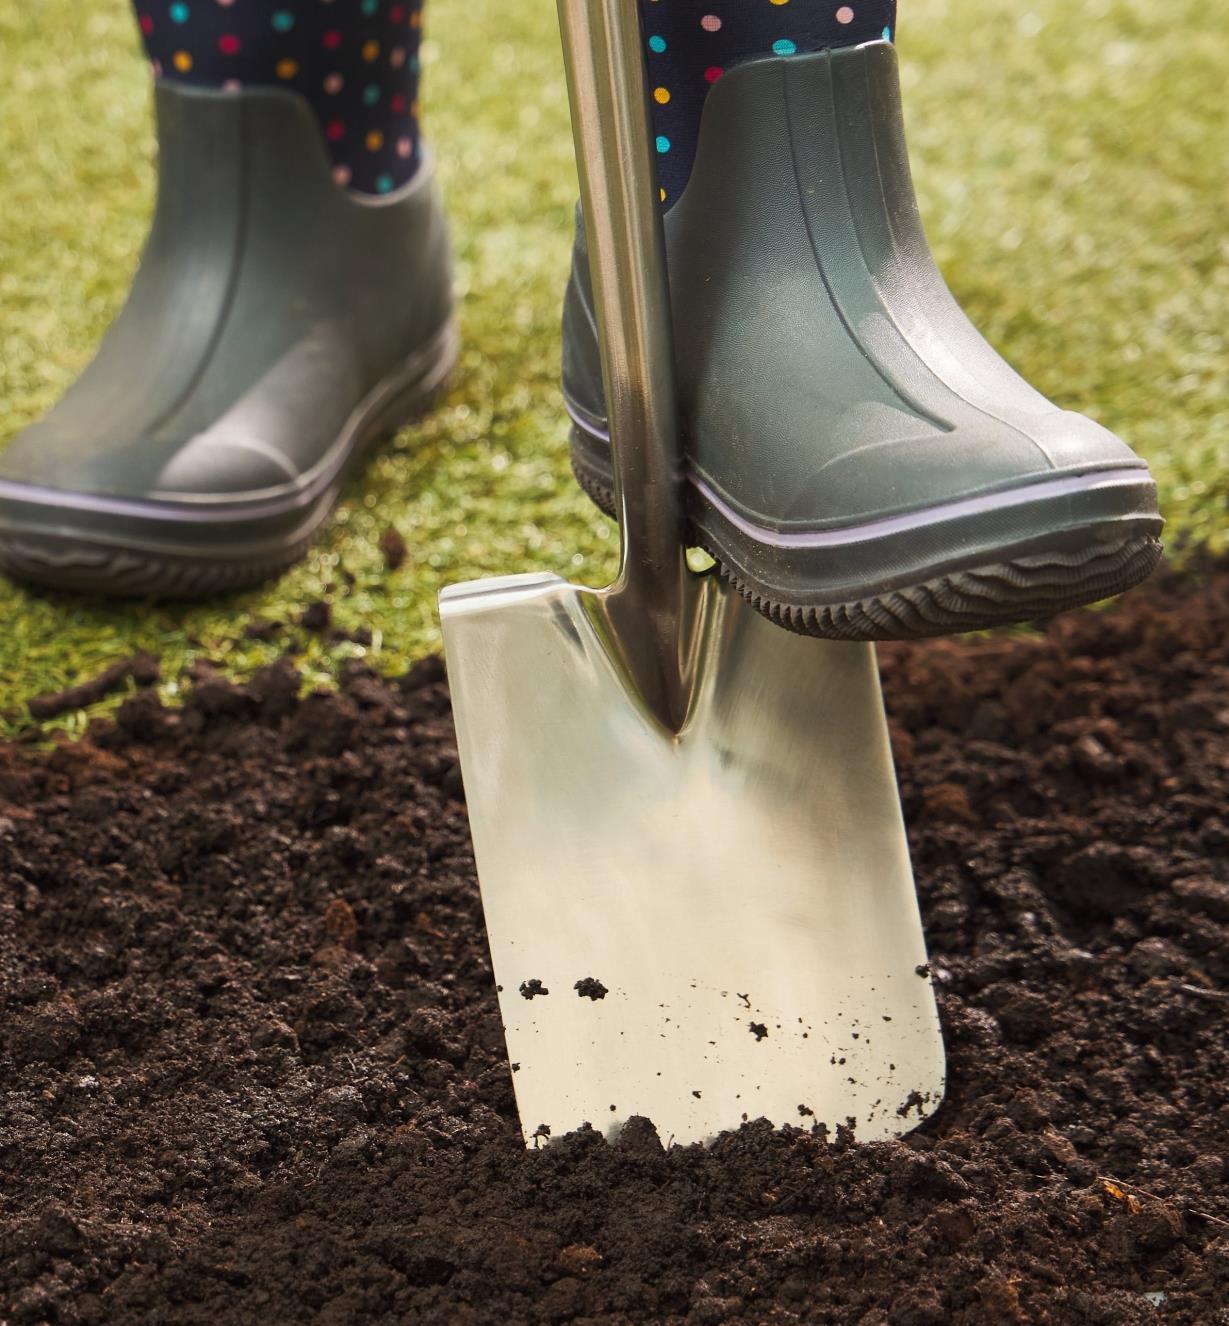 A child’s boot rests on the tread of the children’s digging space as it is pushed into soil